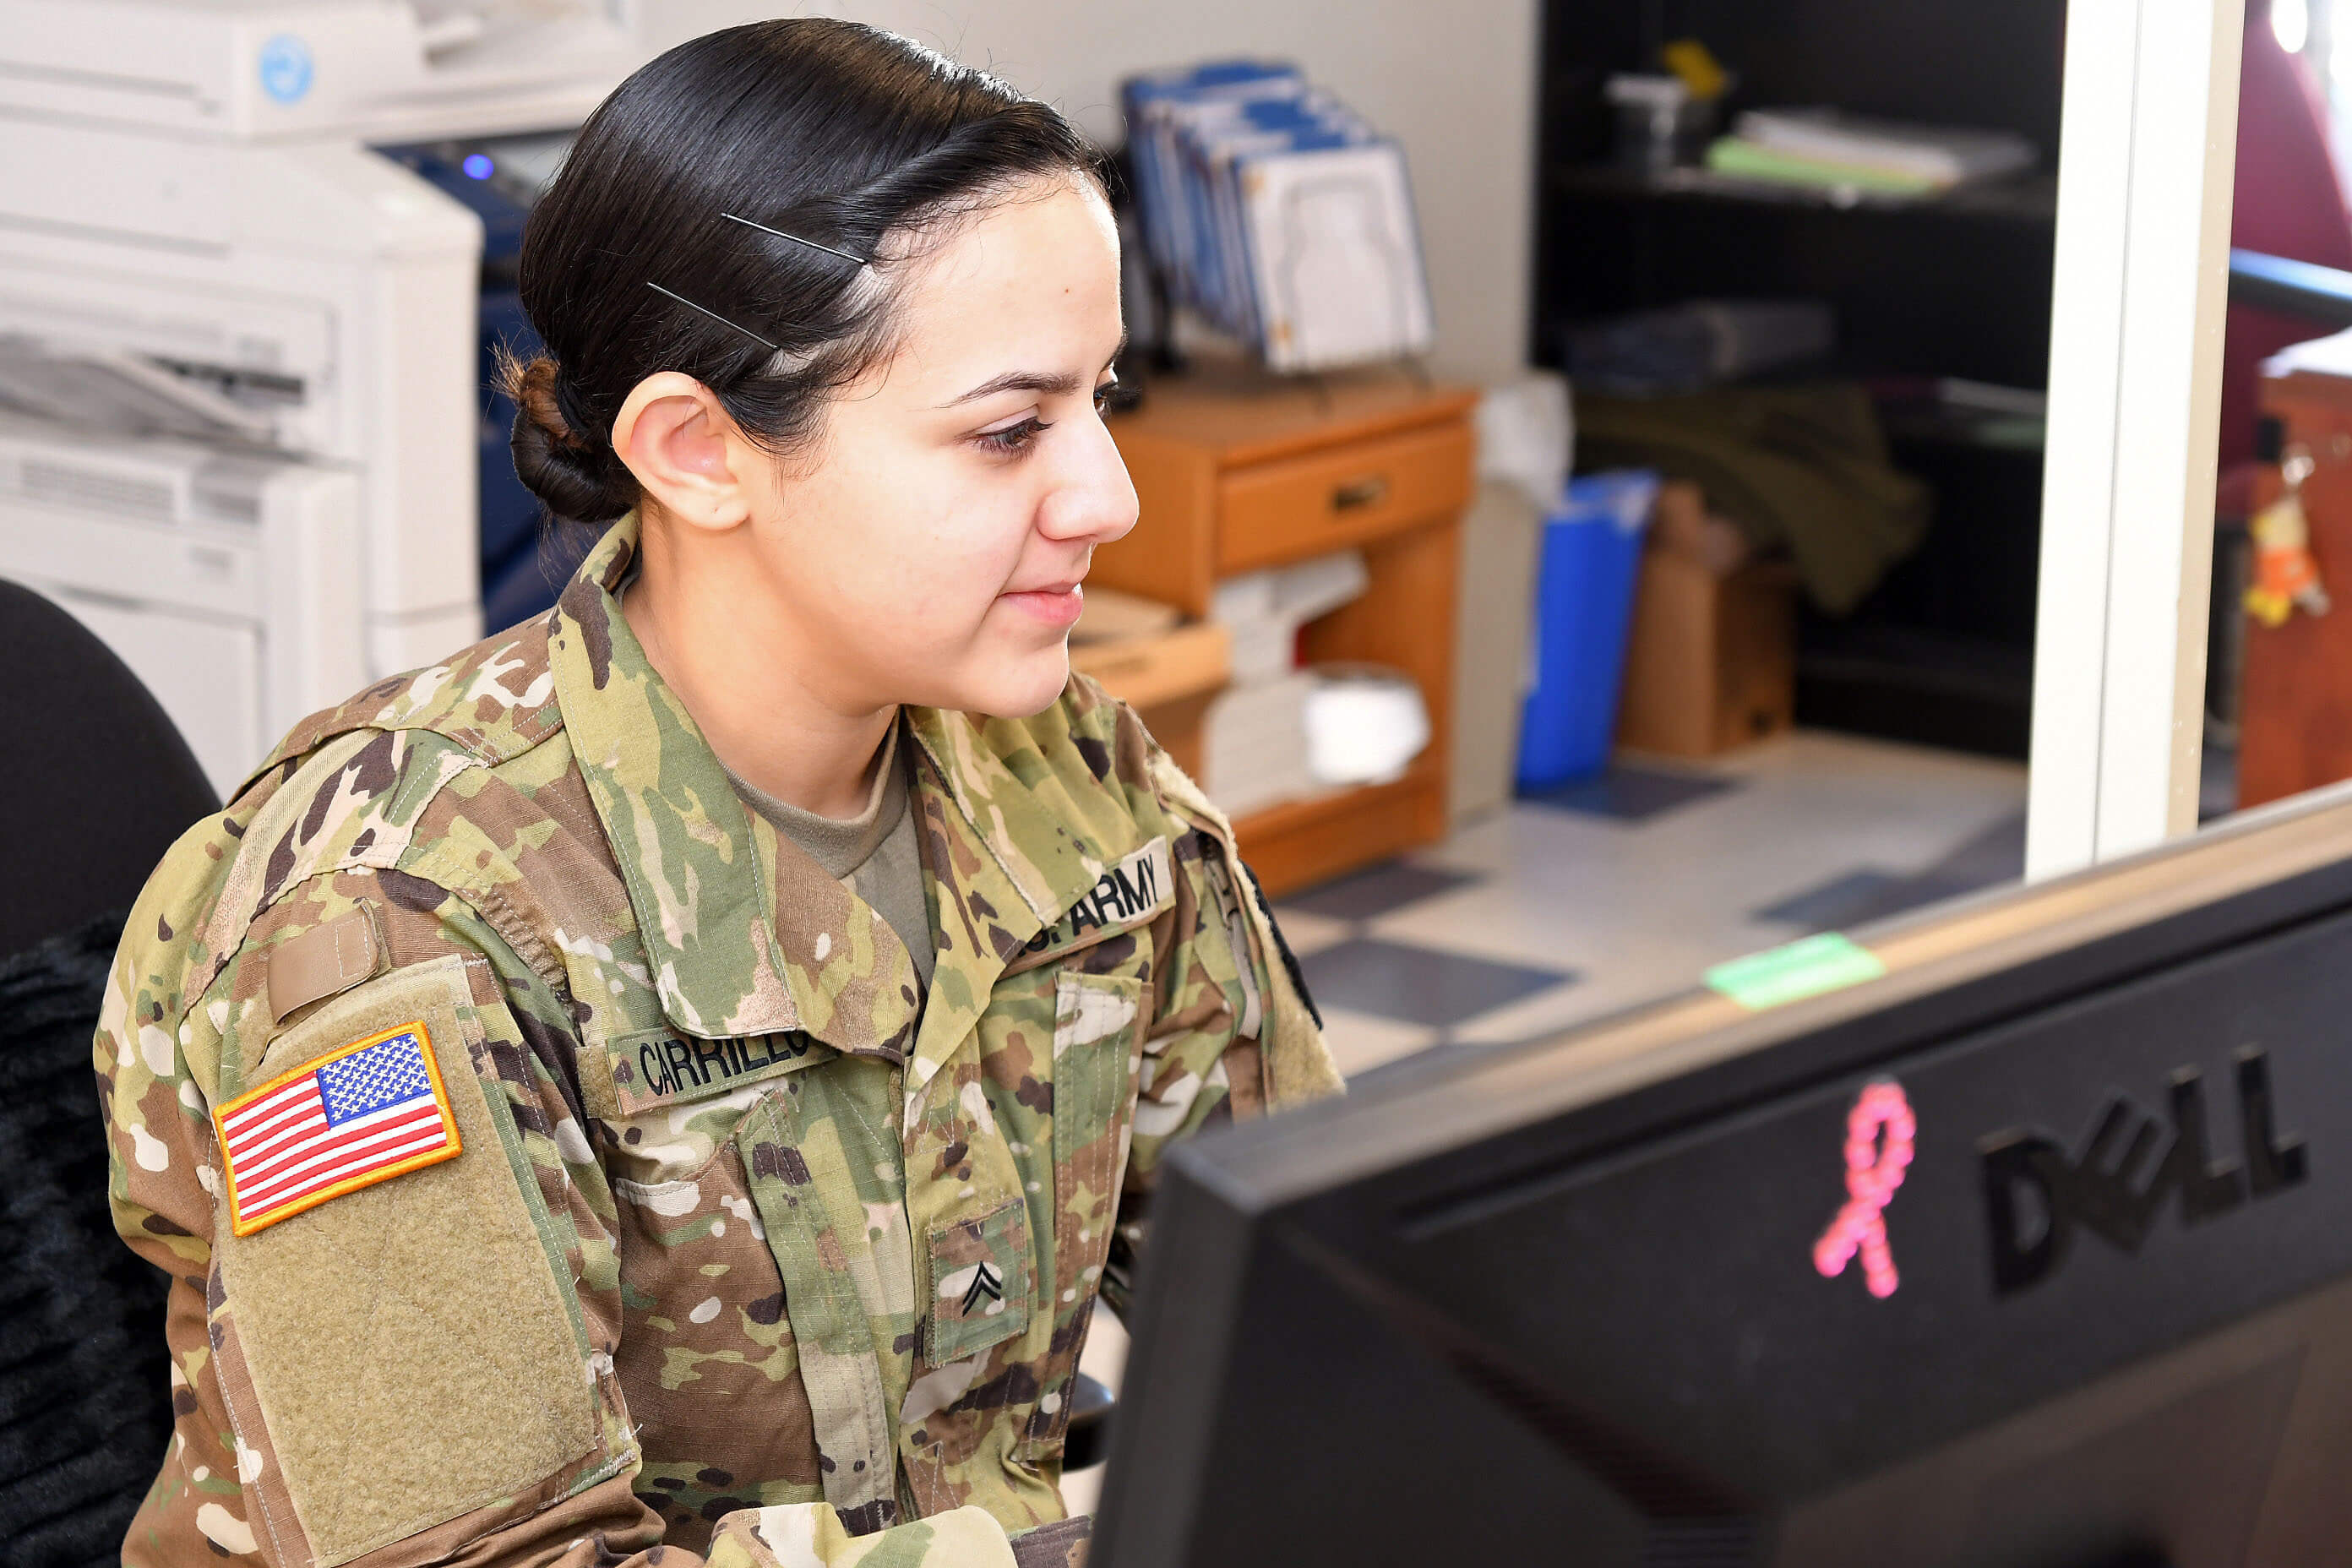 An images of a Servicemember working at her computer